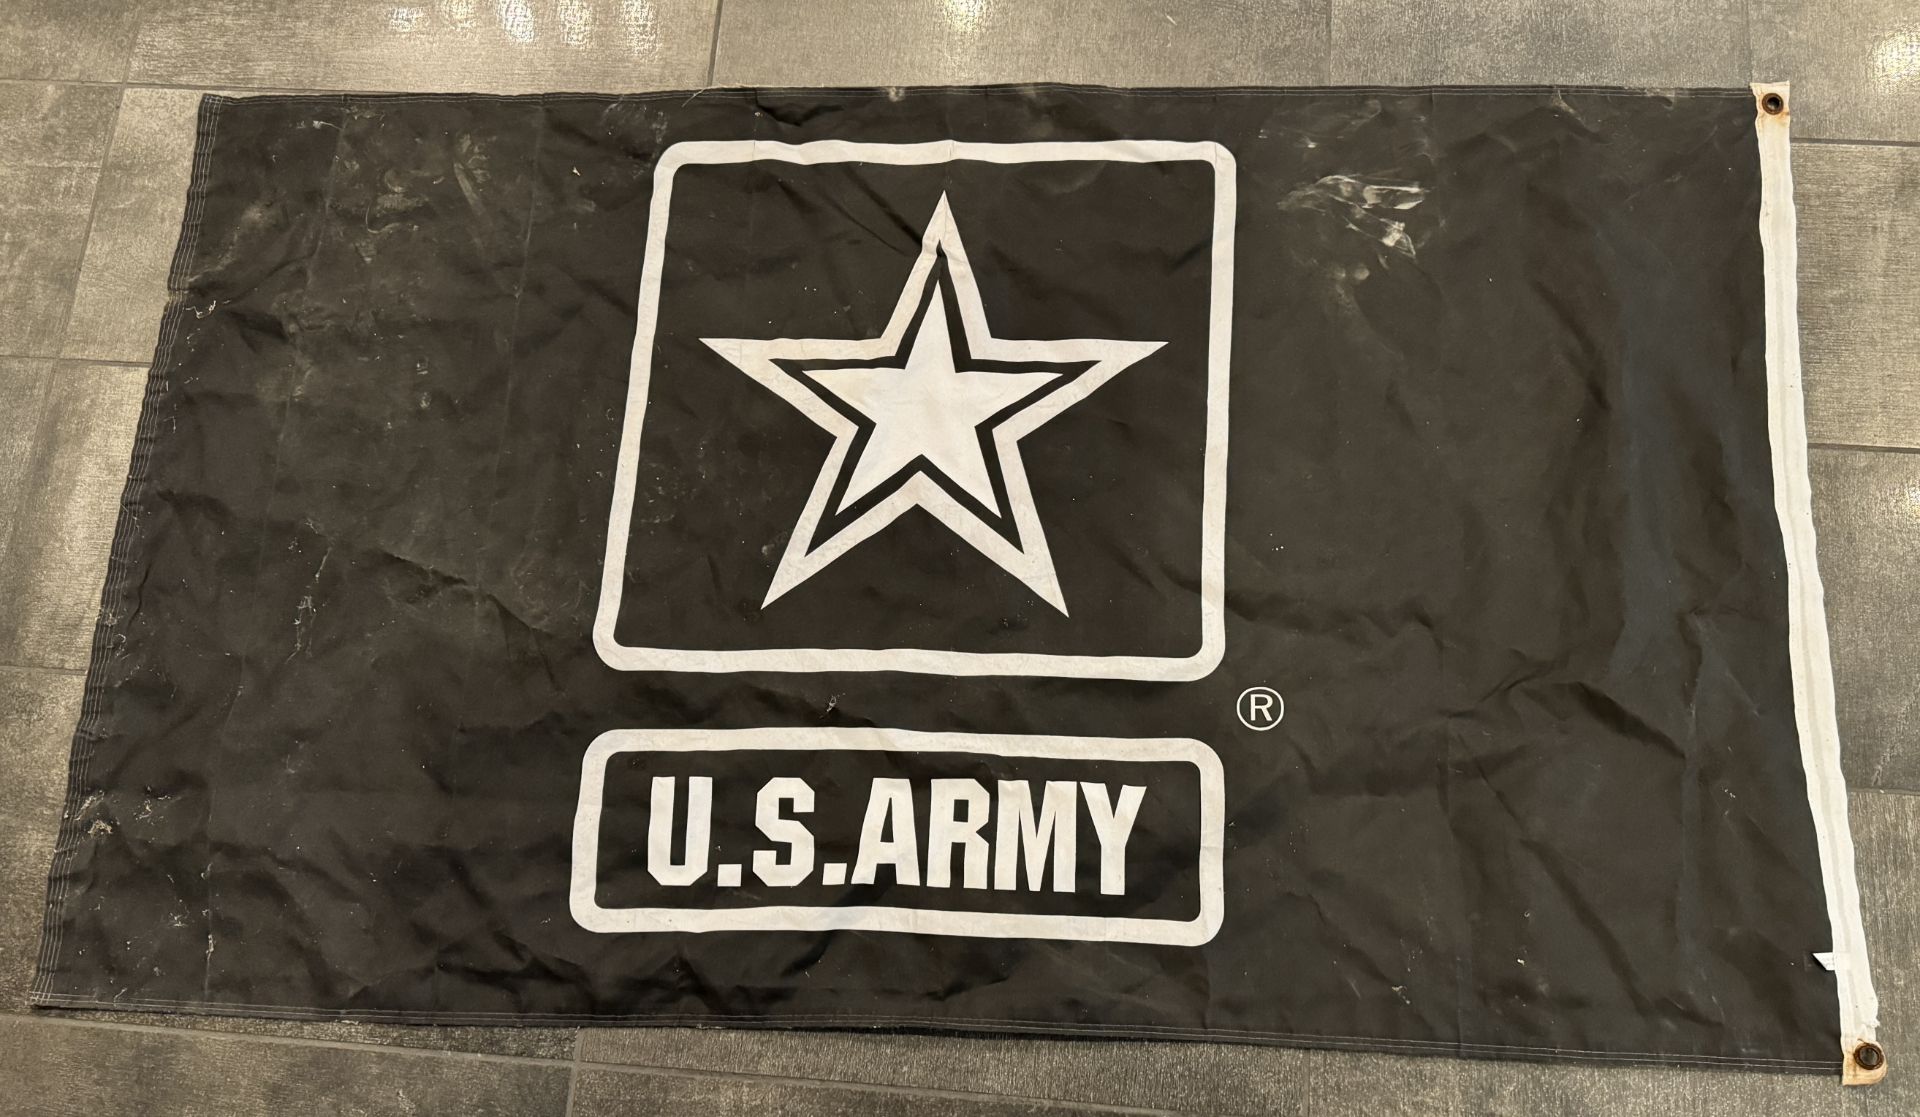 STANDARD SIZE U.S ARMY FLAG - Image 2 of 2